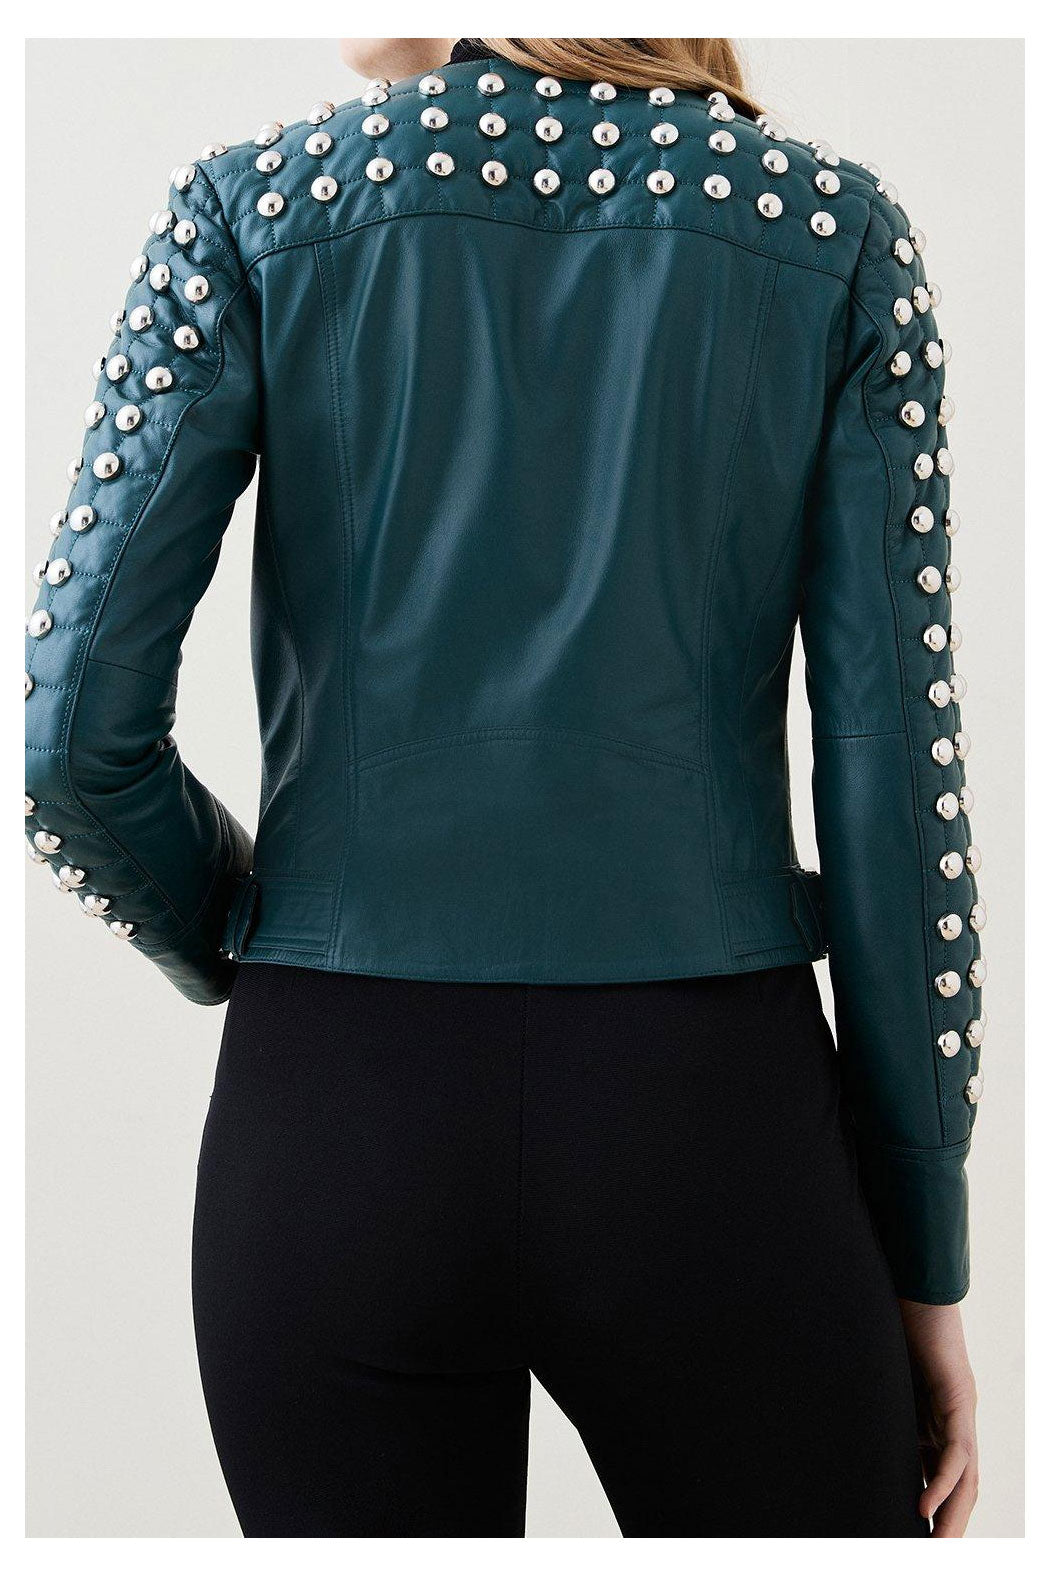 New Best Women Chocolat Green Motorcycle Style Silver Spiked Studded Leather Biker Jacket